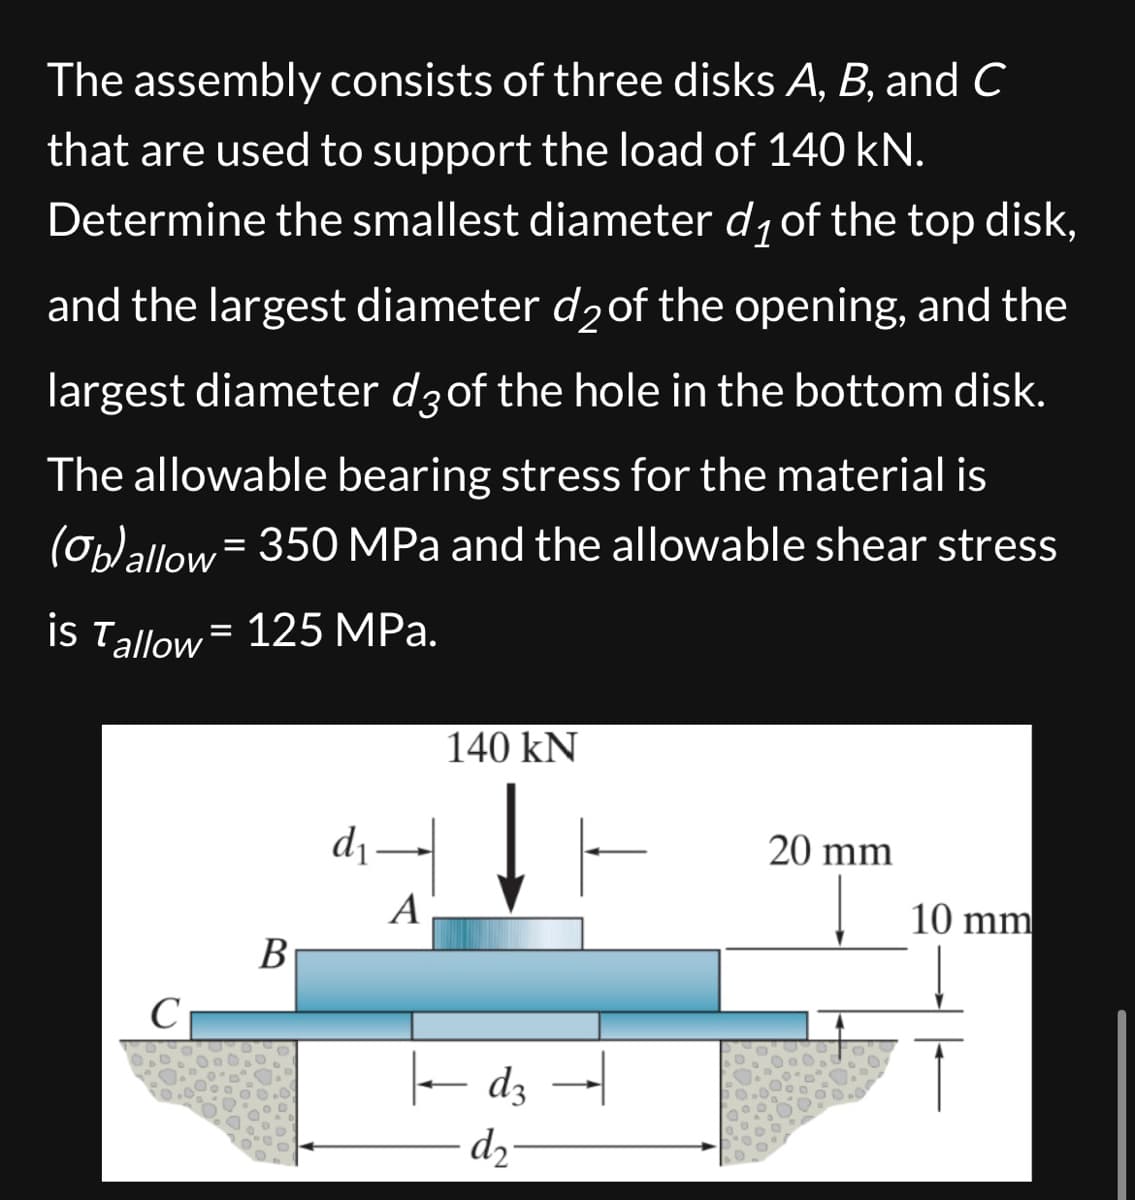 The assembly consists of three disks A, B, and C
that are used to support the load of 140 kN.
Determine the smallest diameter d₁ of the top disk,
and the largest diameter d₂ of the opening, and the
largest diameter d3 of the hole in the bottom disk.
The allowable bearing stress for the material is
(b) allow = 350 MPa and the allowable shear stress
is Tallow=125 MPa.
C
B
d₁ -|
A
140 kN
20 mm
10 mm
d3
d2